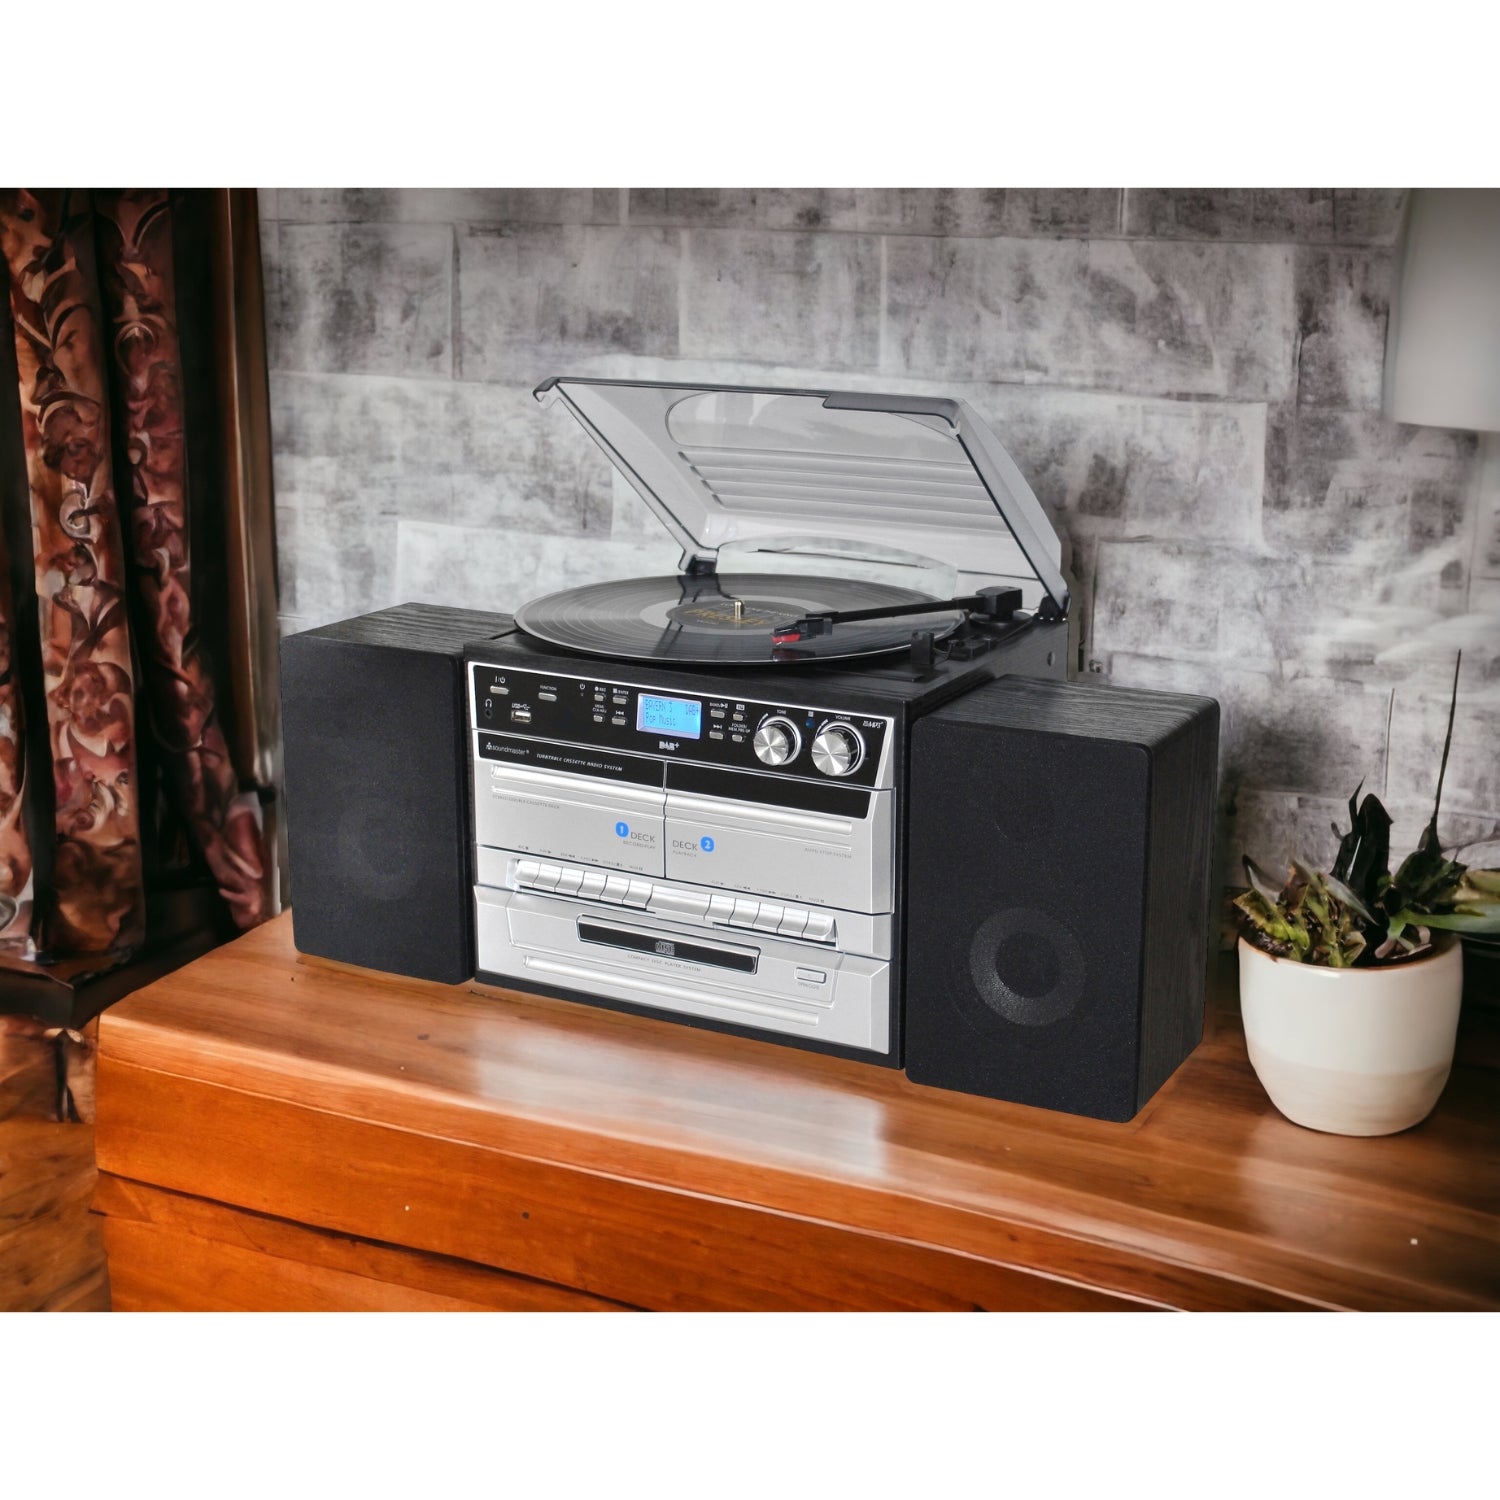 Soundmaster MCD5550SW stereo system DAB+ double cassette Bluetooth CD MP3 turntable USB encoding digitization